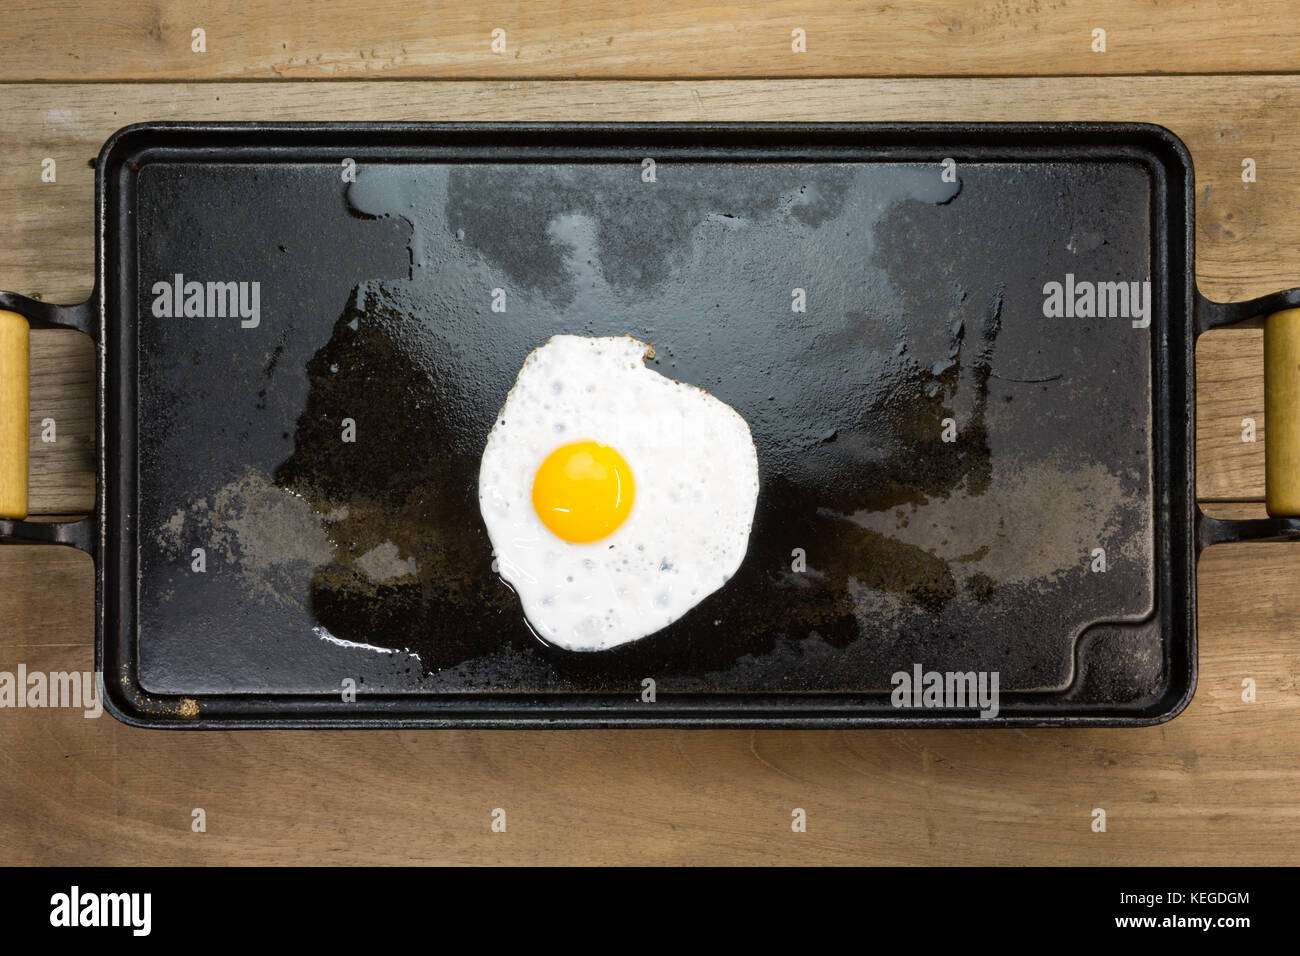 Fried egg white and yolk rectangular cast iron flat griddle pan with wooden handles, wood tabletop background, flat lay Stock Photo